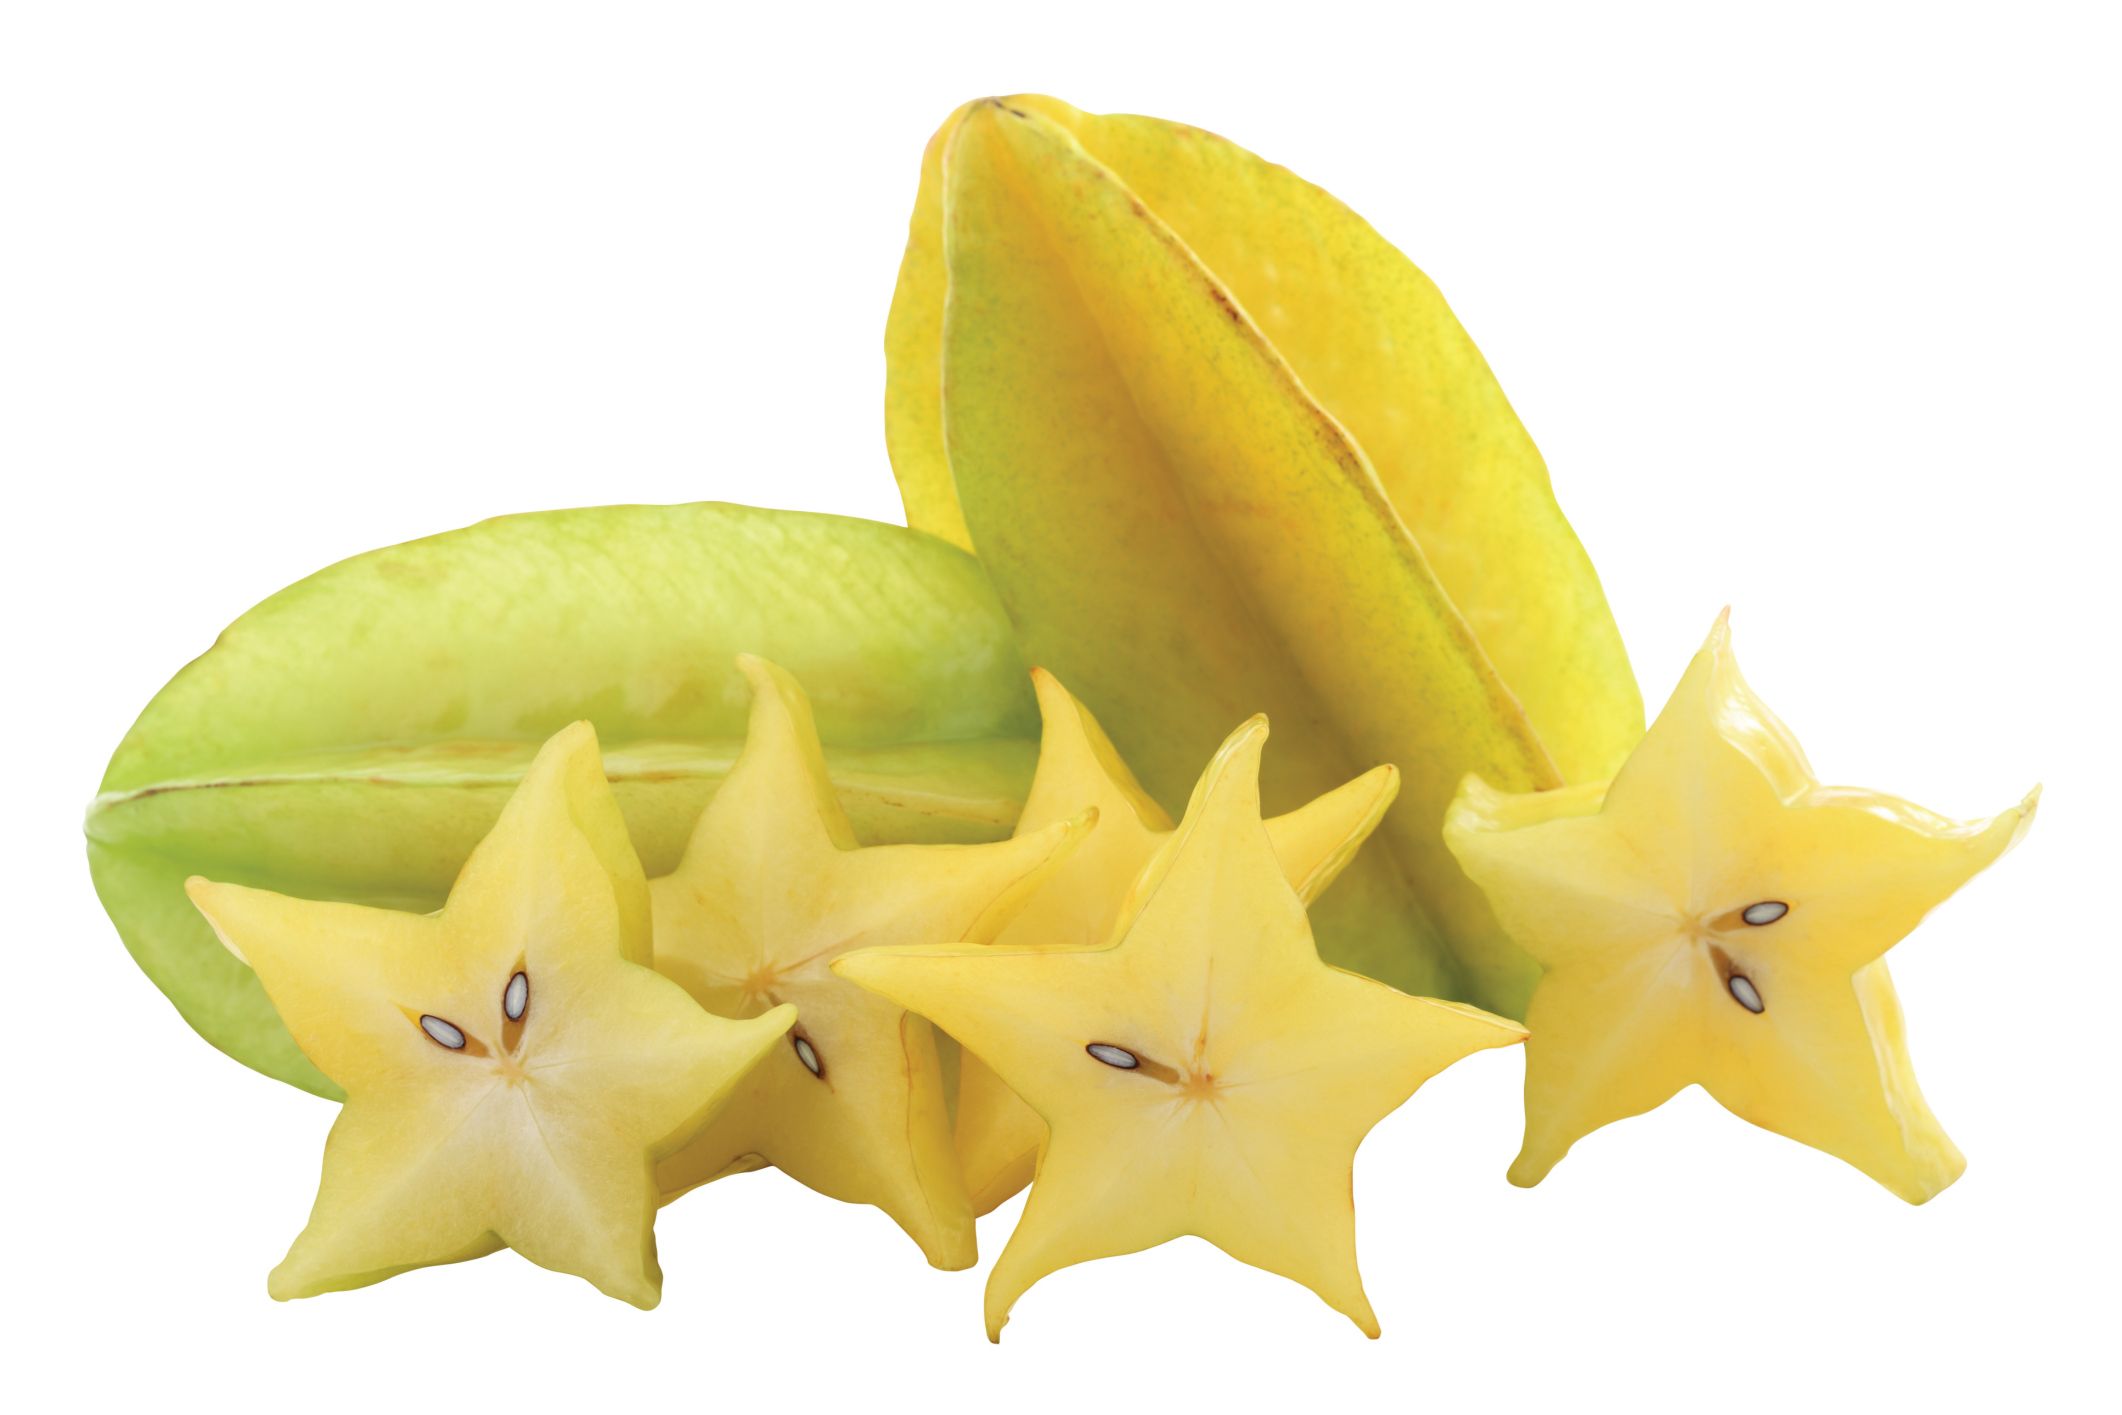 Star fruit, some of the traditional fruit of Rosh Hashanah